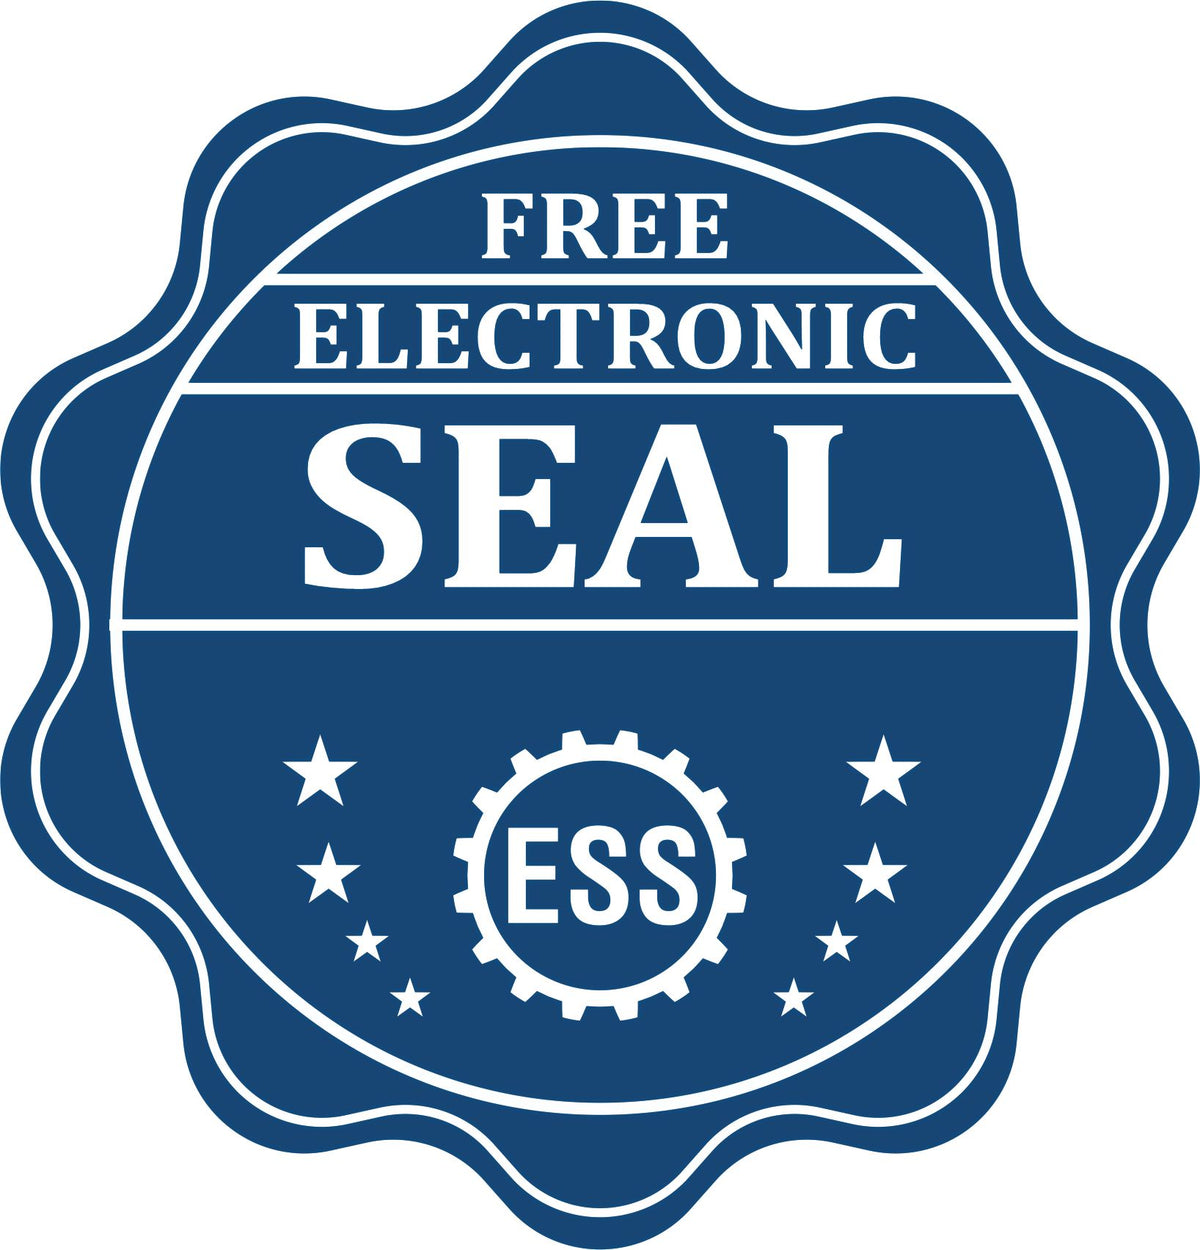 A badge showing a free electronic seal for the Mississippi Desk Architect Embossing Seal with stars and the ESS gear on the emblem.